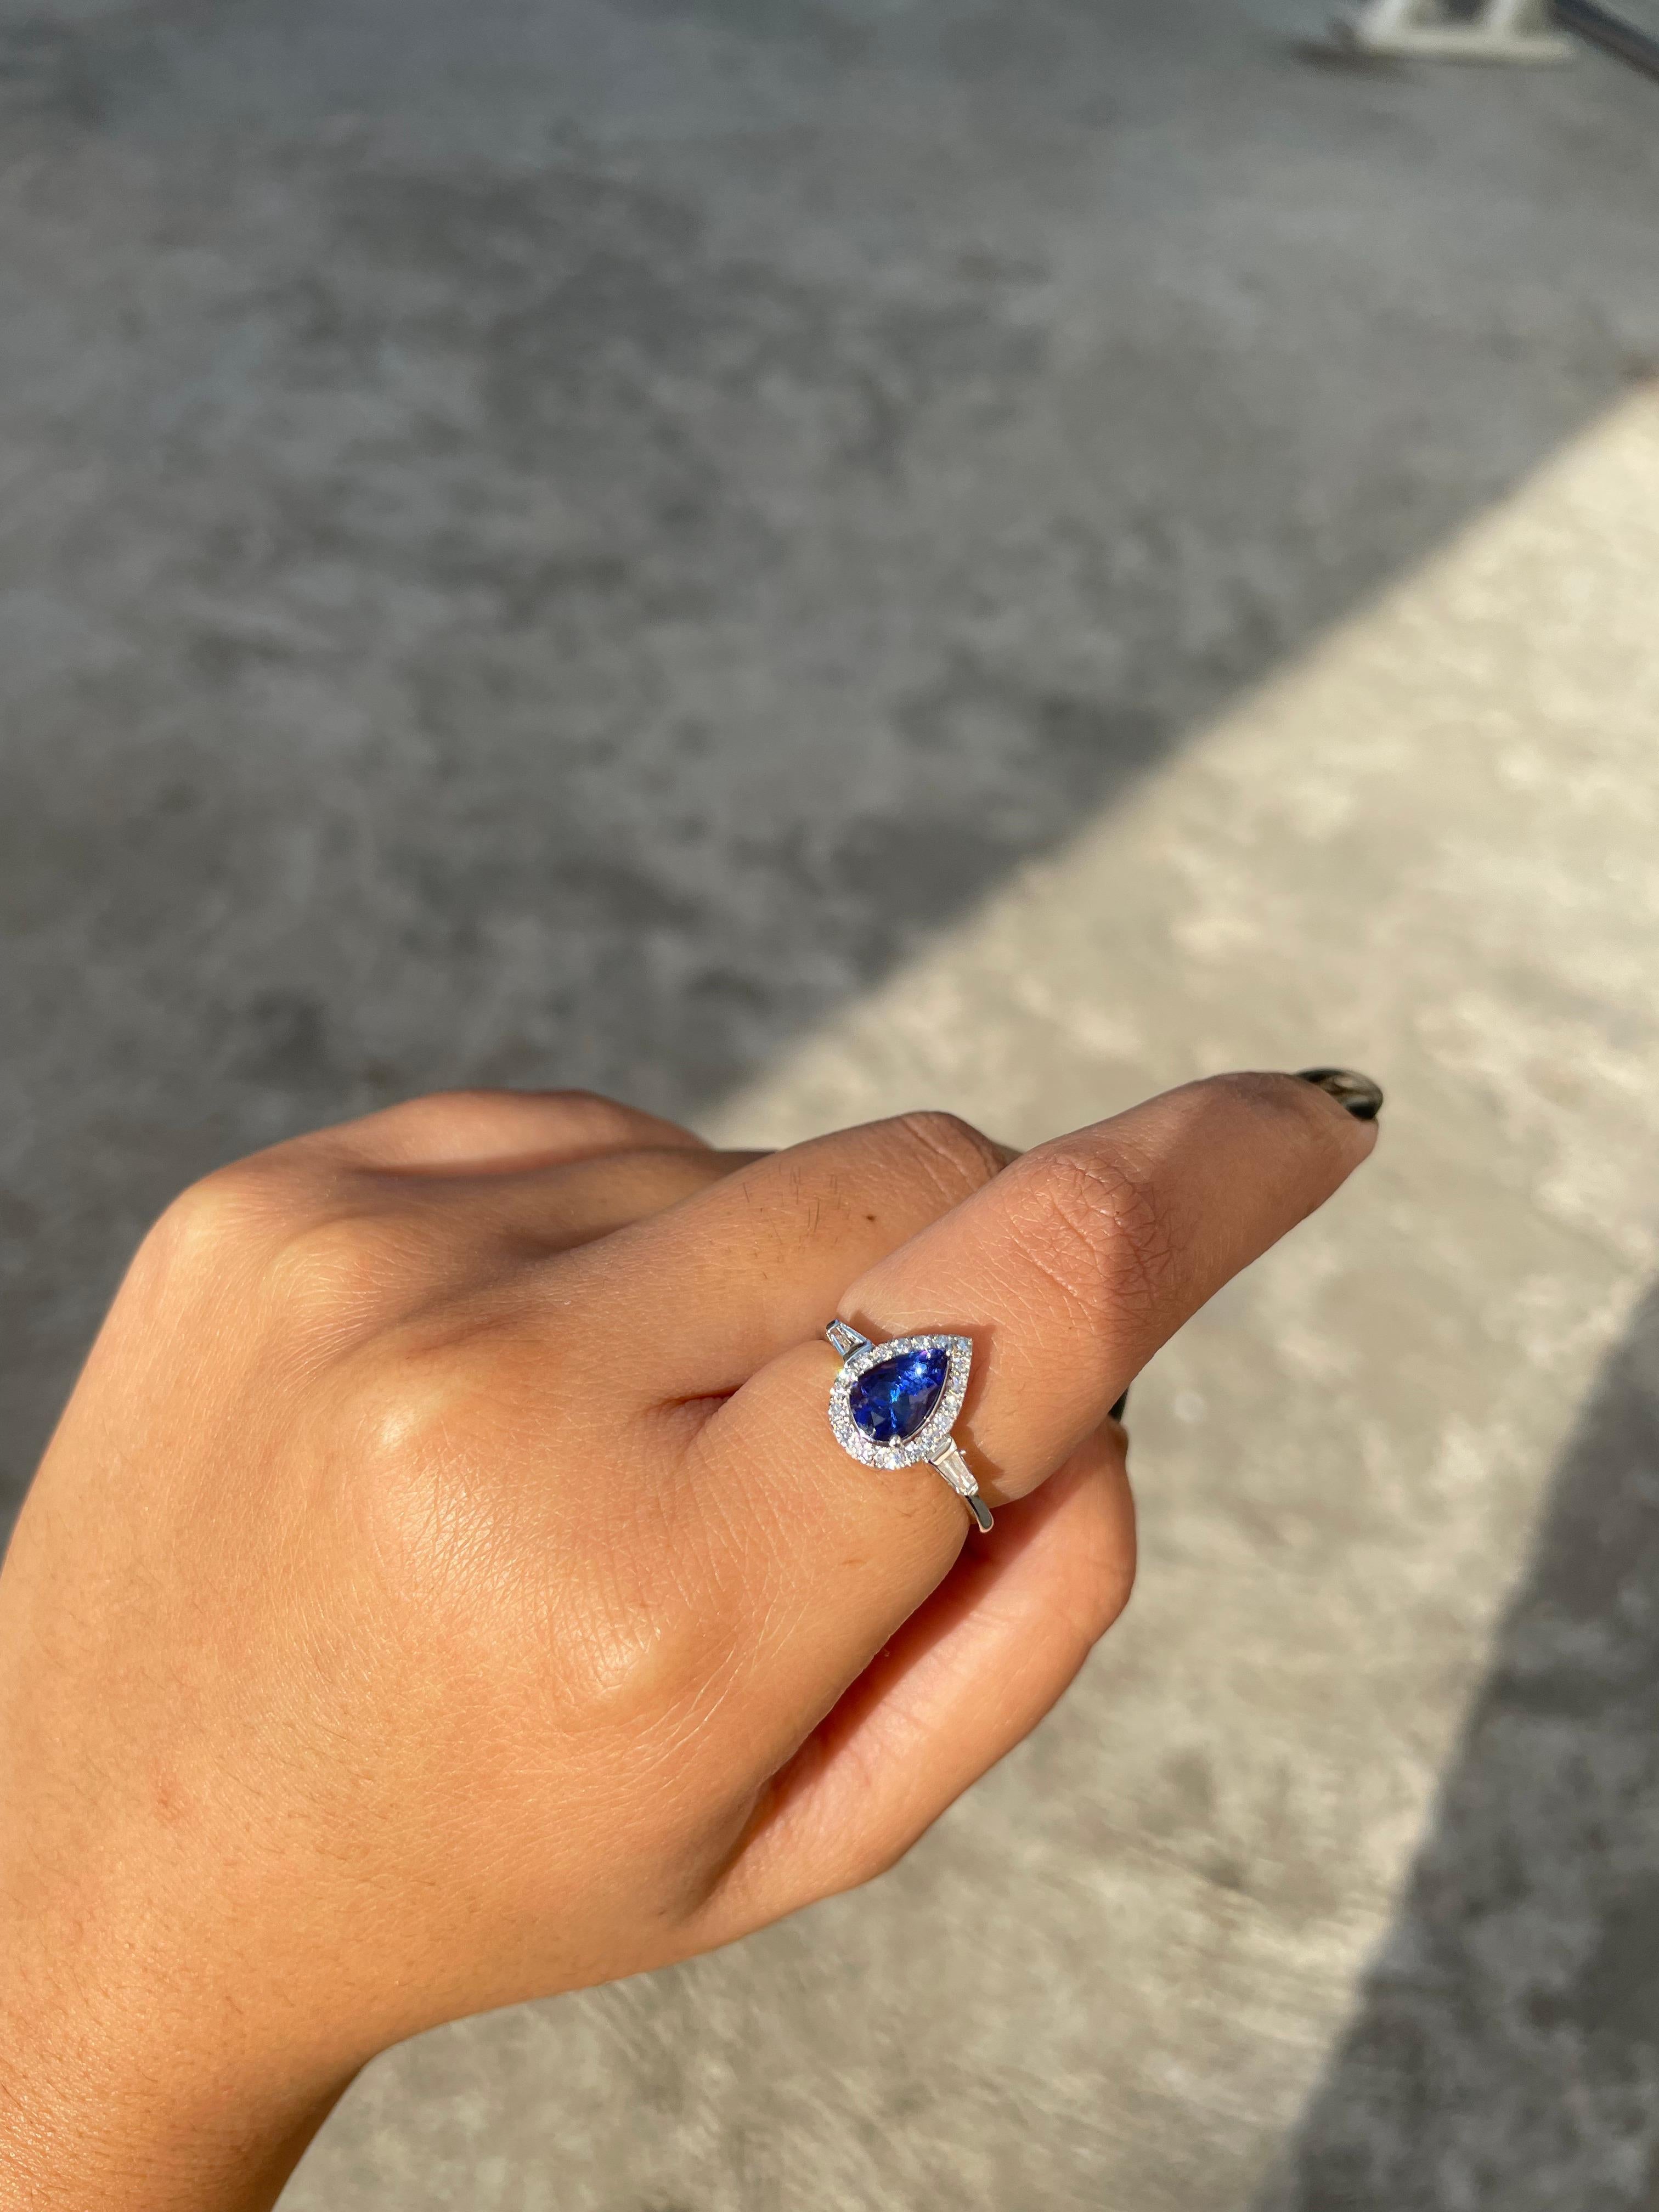 For Sale:  1.1 CTW Pear Shaped Tanzanite and Diamond Ring in 18k Solid White Gold 7